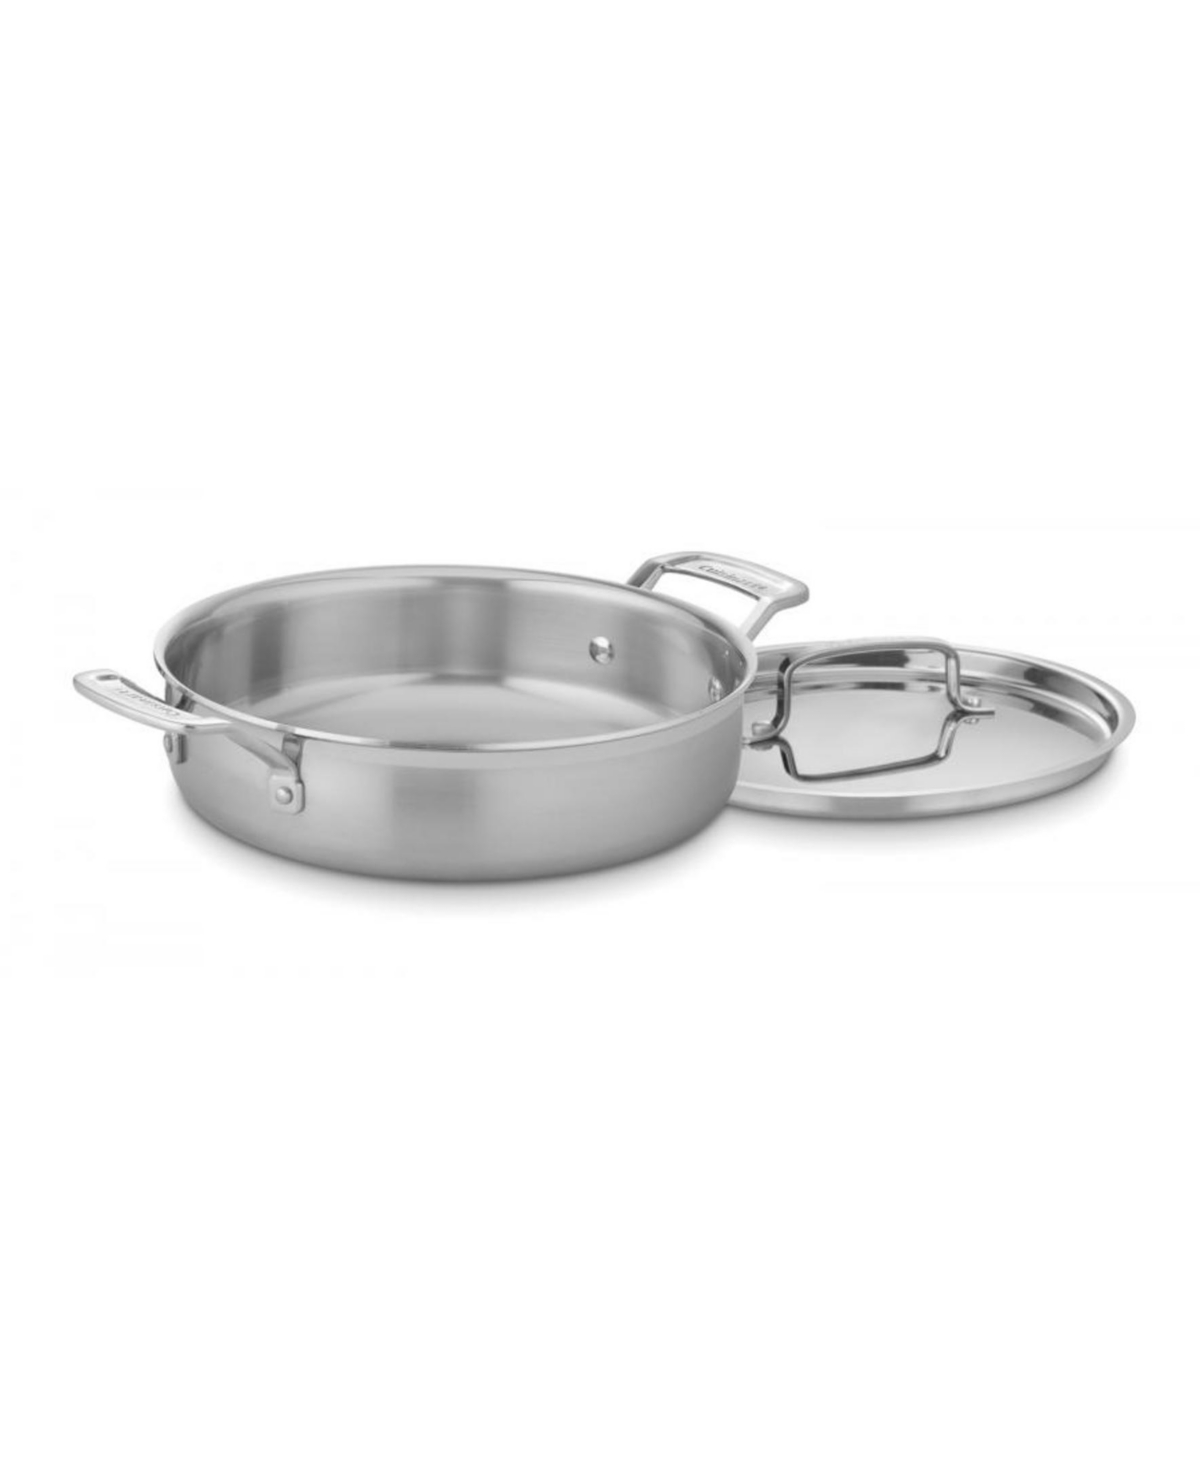 Cuisinart Multiclad Pro 3-qt. Casserole With Cover In Stainless Steel